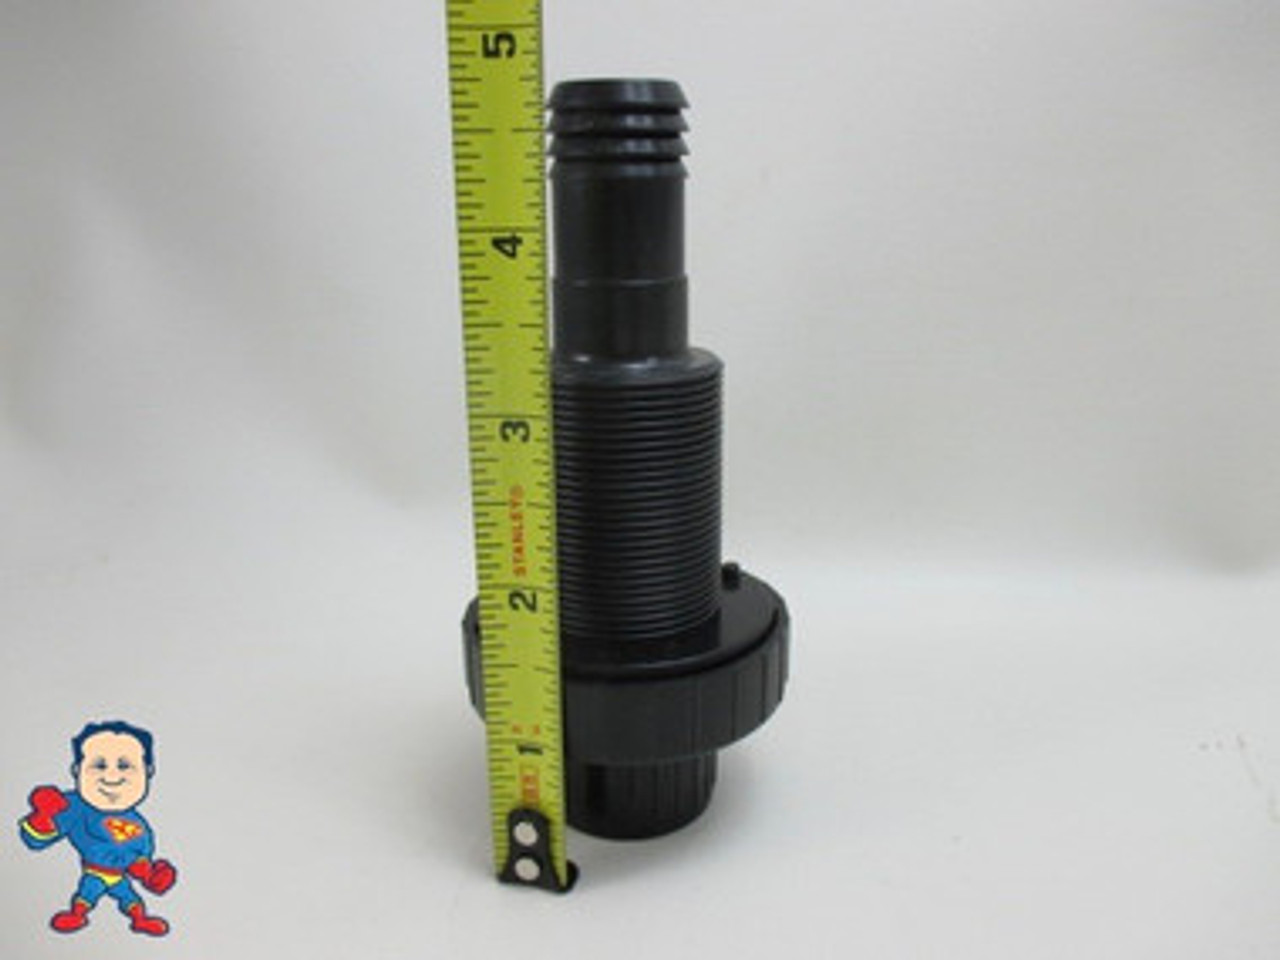 Hot Tub Drain Valve with 3/4" Barb Master Spa Twilight Clarity Legacy